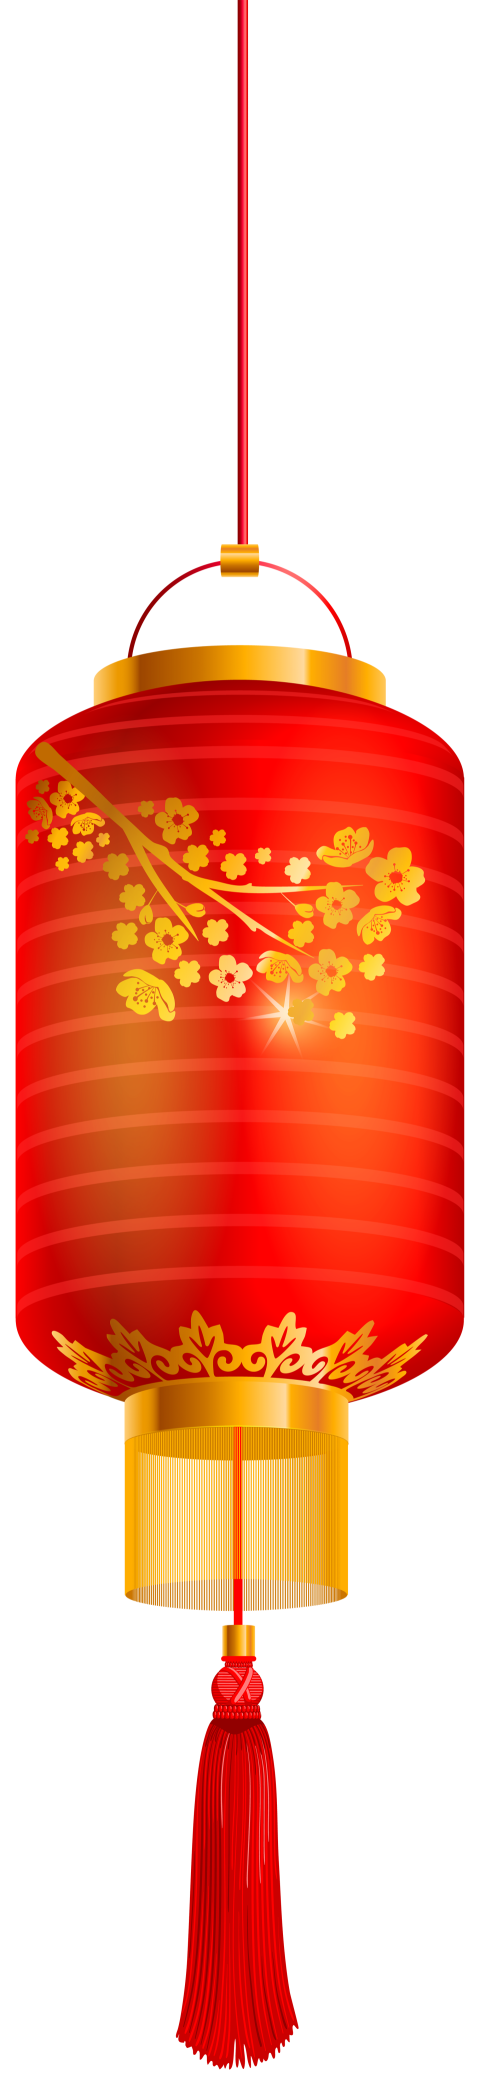 Chinese Fastival Lantern With Sign of Happies Graphic Art Sky Lantern Image PNG Free Download